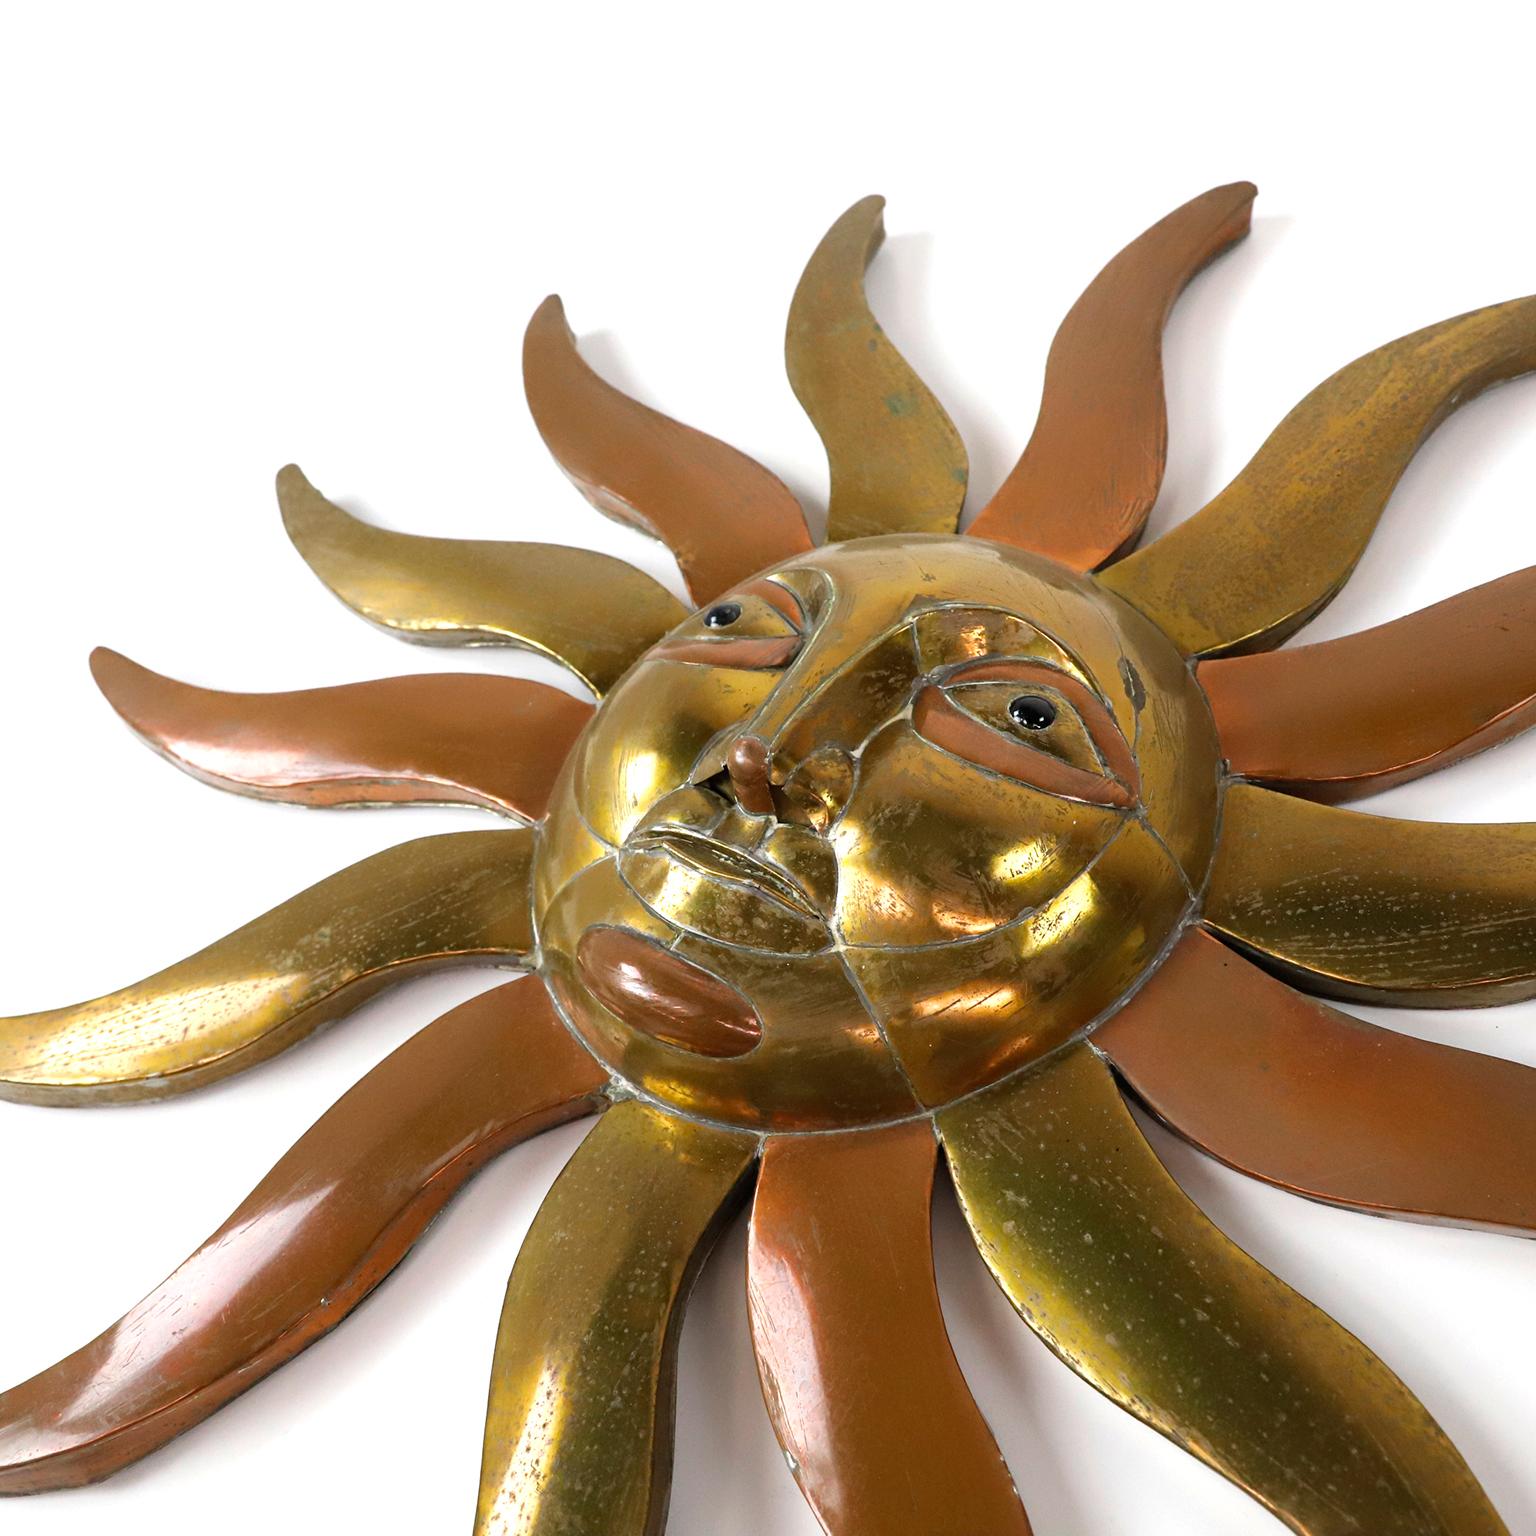 We offer this Surreal Brutalist Sun Sculpture in Brass and Bronze by Sergio Bustamante, circa 1970.